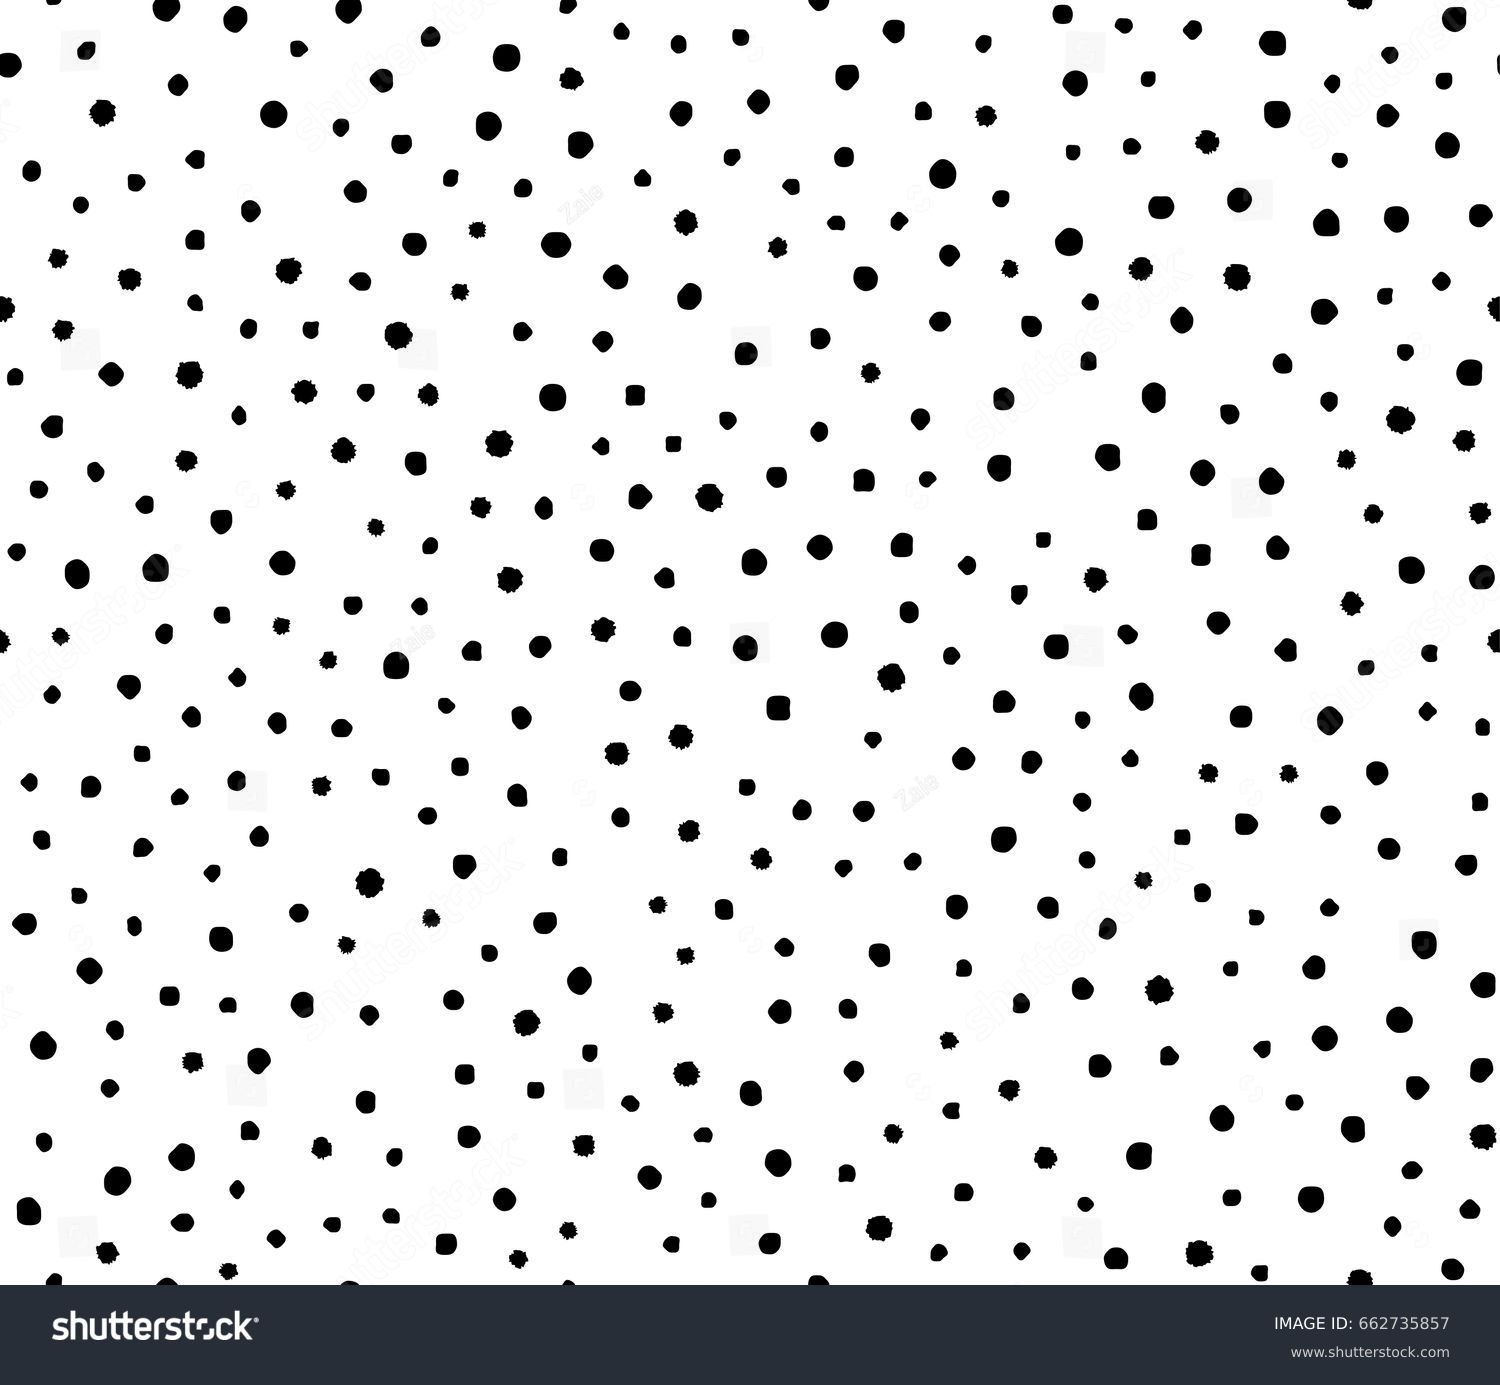 Vector illustration of seamless black dot pattern with different grunge effect rounded spots isolated on white background #662735857